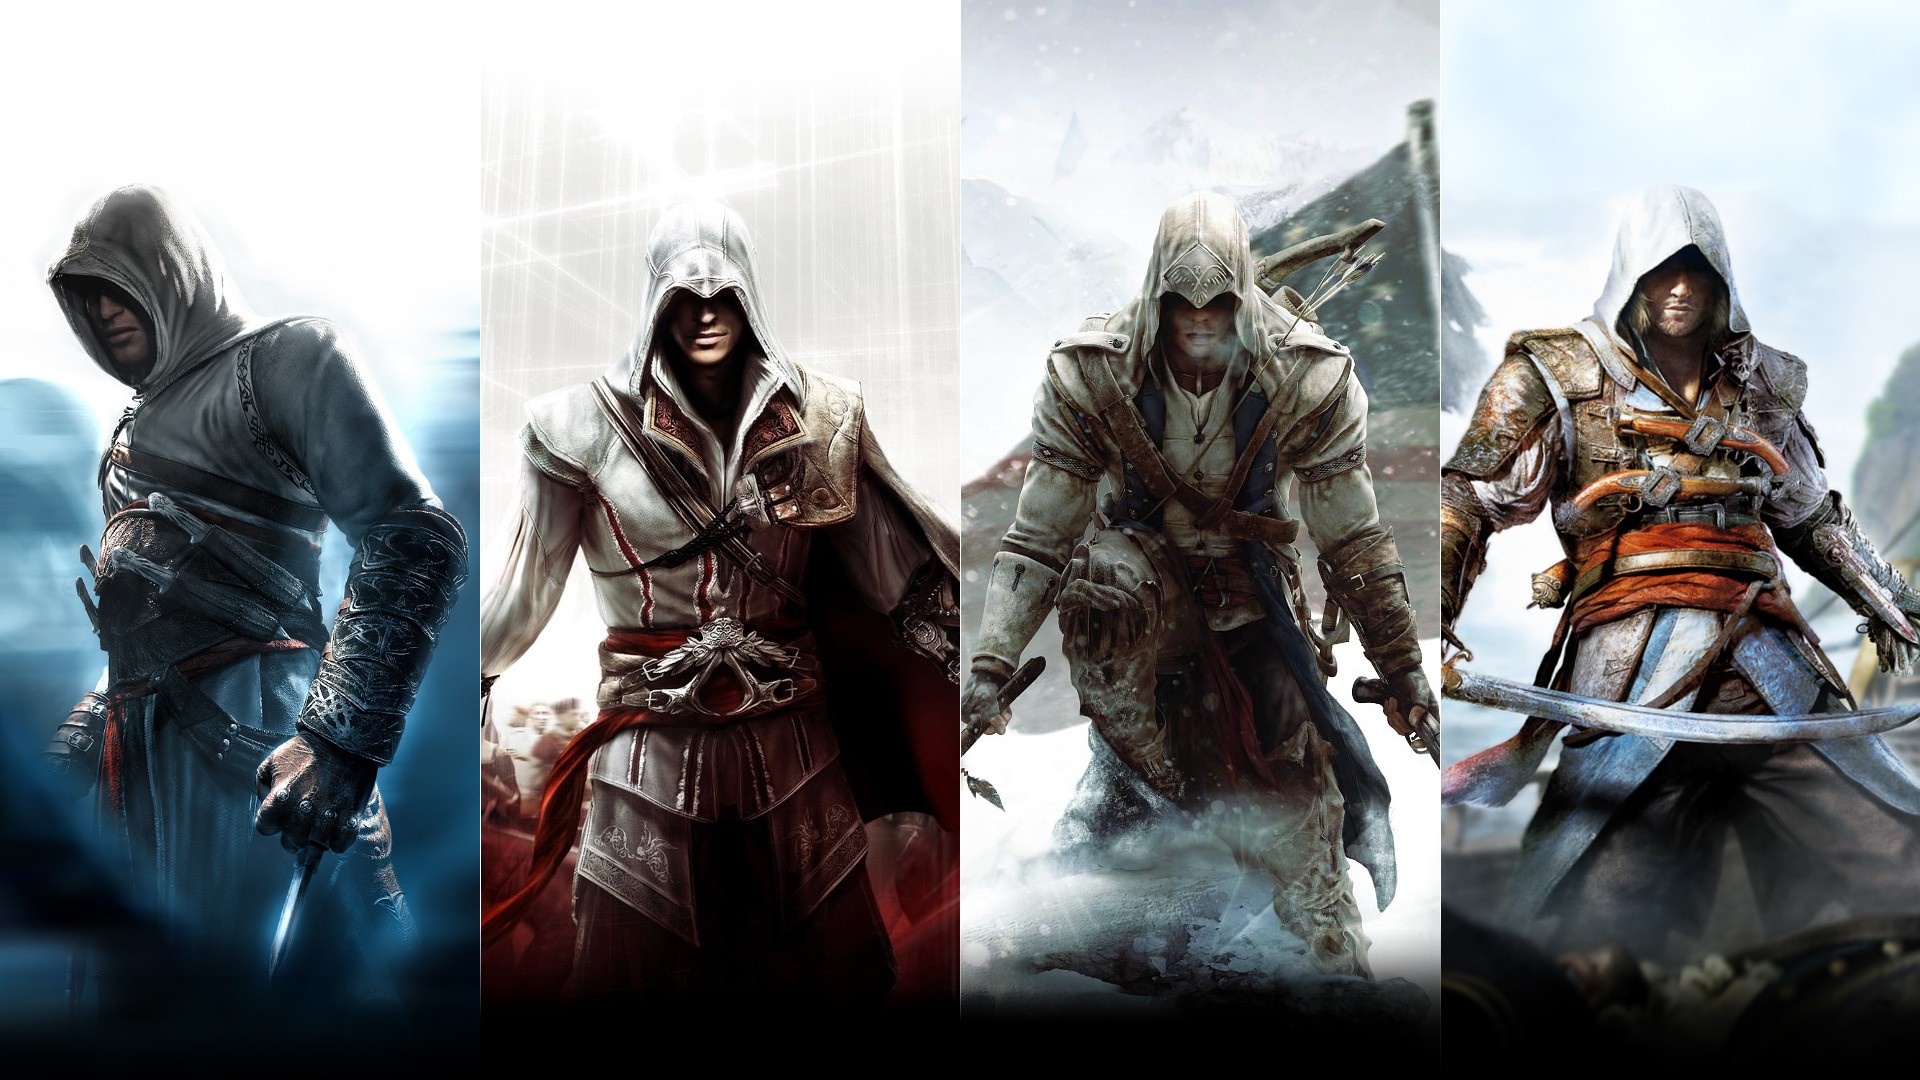 General 1920x1080 Assassin's Creed Edward Kenway Altaïr Ibn-La'Ahad Connor Kenway collage video games